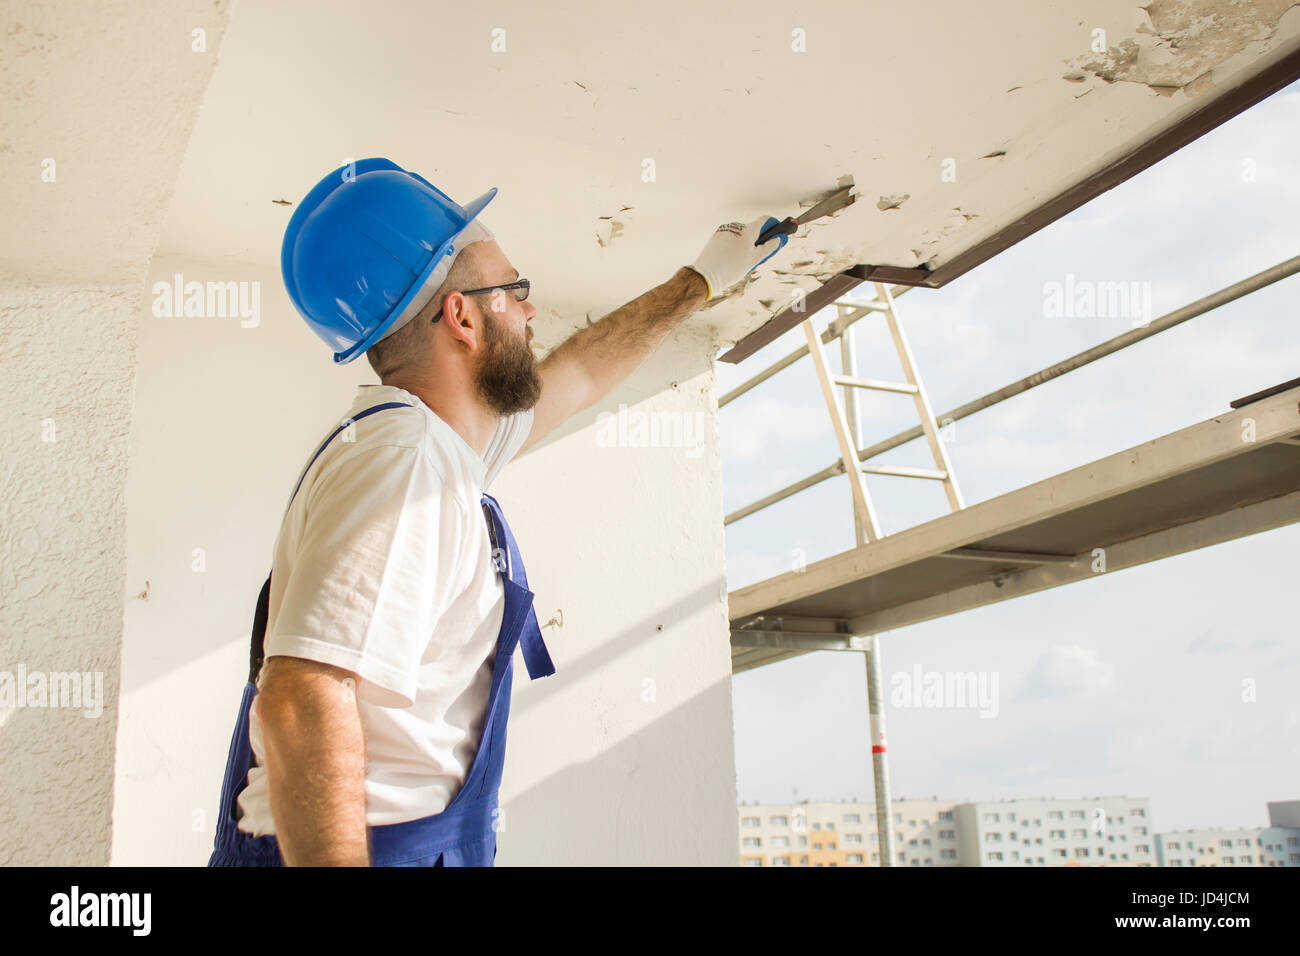 Construction worker in work attire, protective gloves and a helmet on site. Remove the old paint spatula from the ceiling. Stock Photo